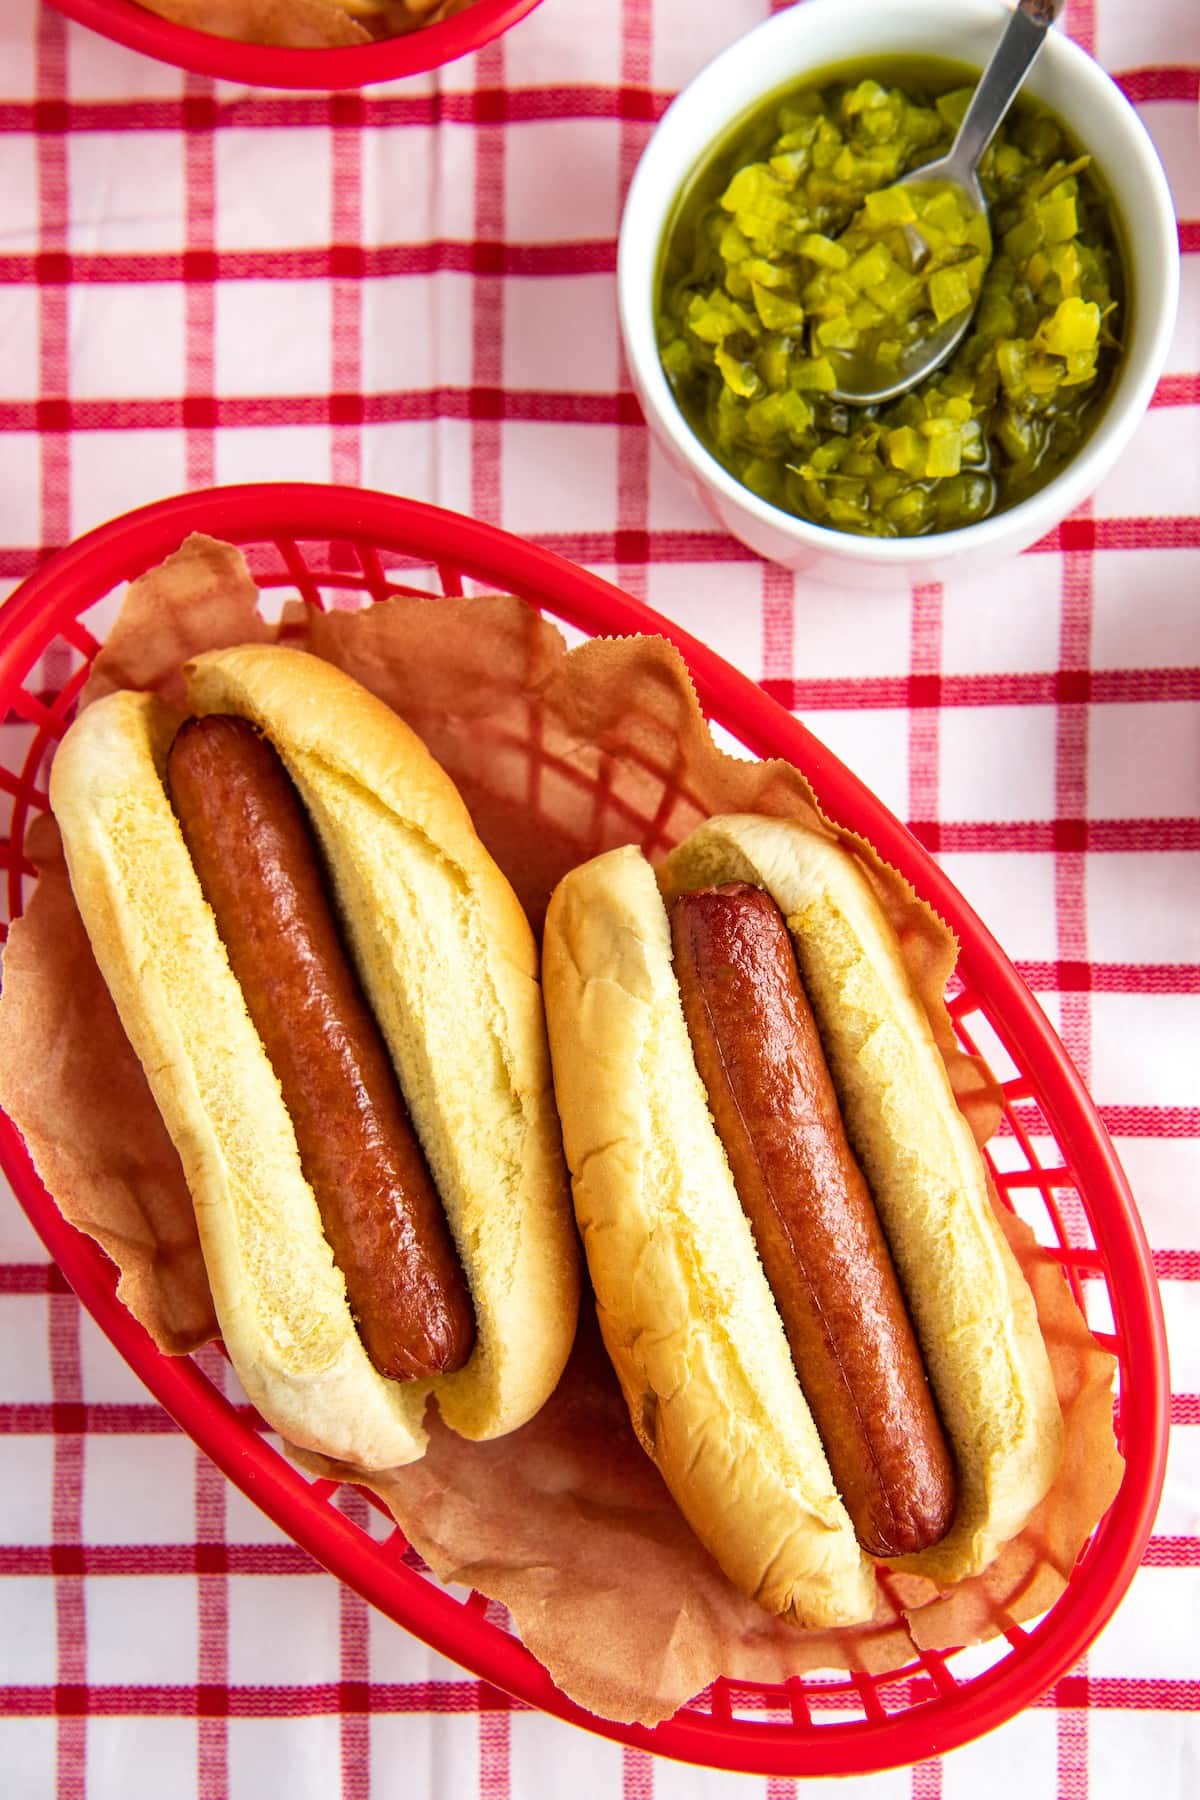 Two hot dogs in a basket next to a bowl of relish.